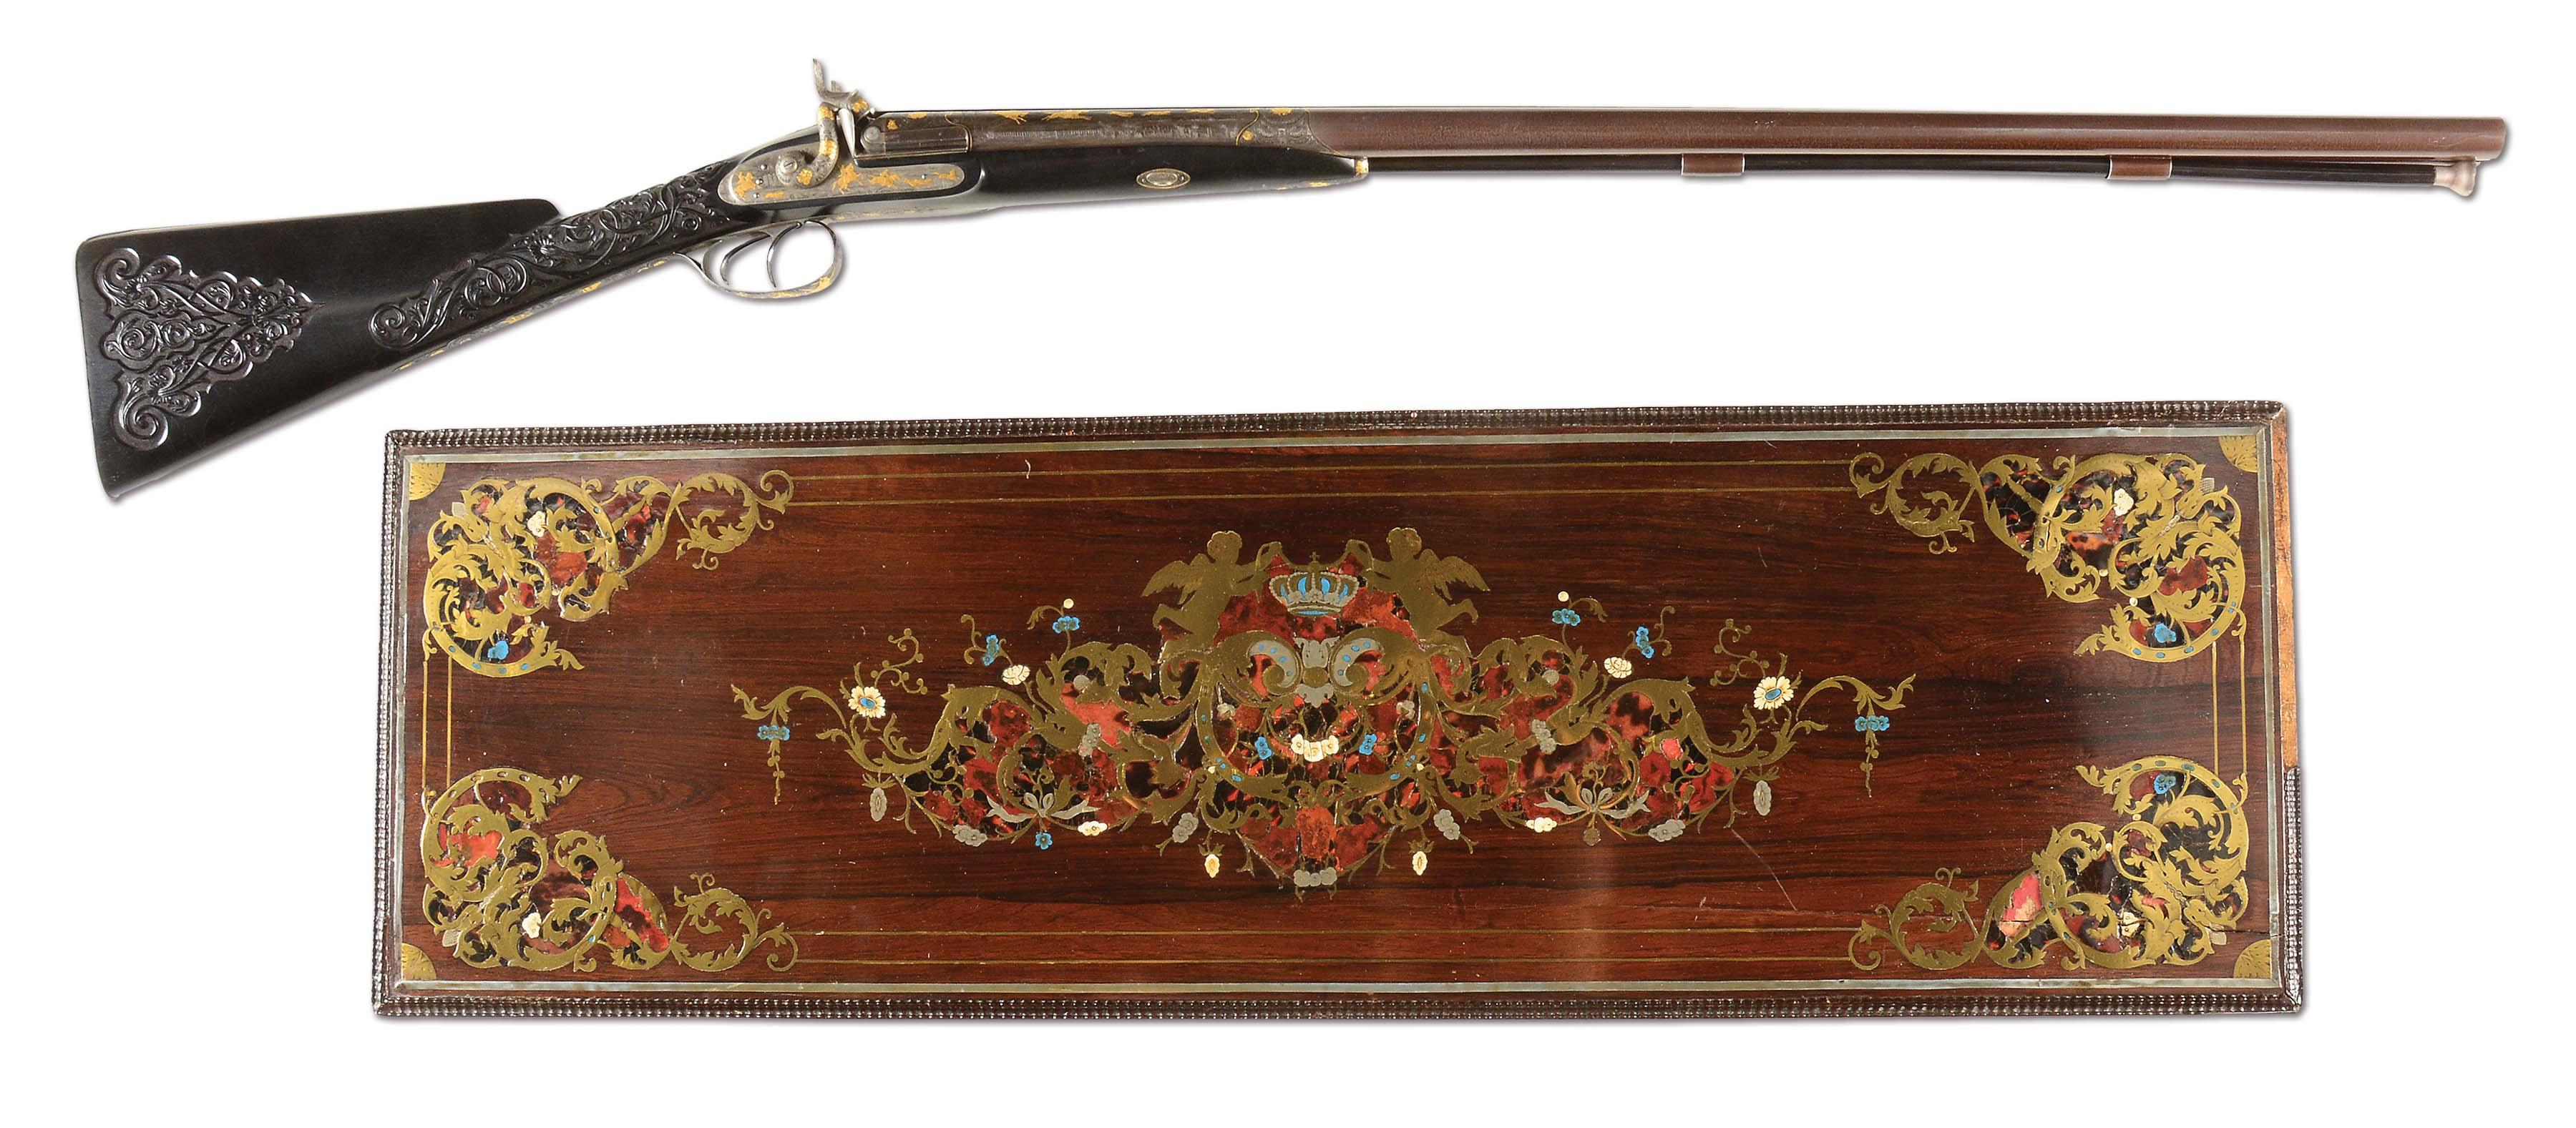 (A) TRULY SUPERB QUALITY, BEAUTIFULLY RELIEF GOLD INLAID AND ENGRAVED PERCUSSION SHOTGUN BY KOEZI